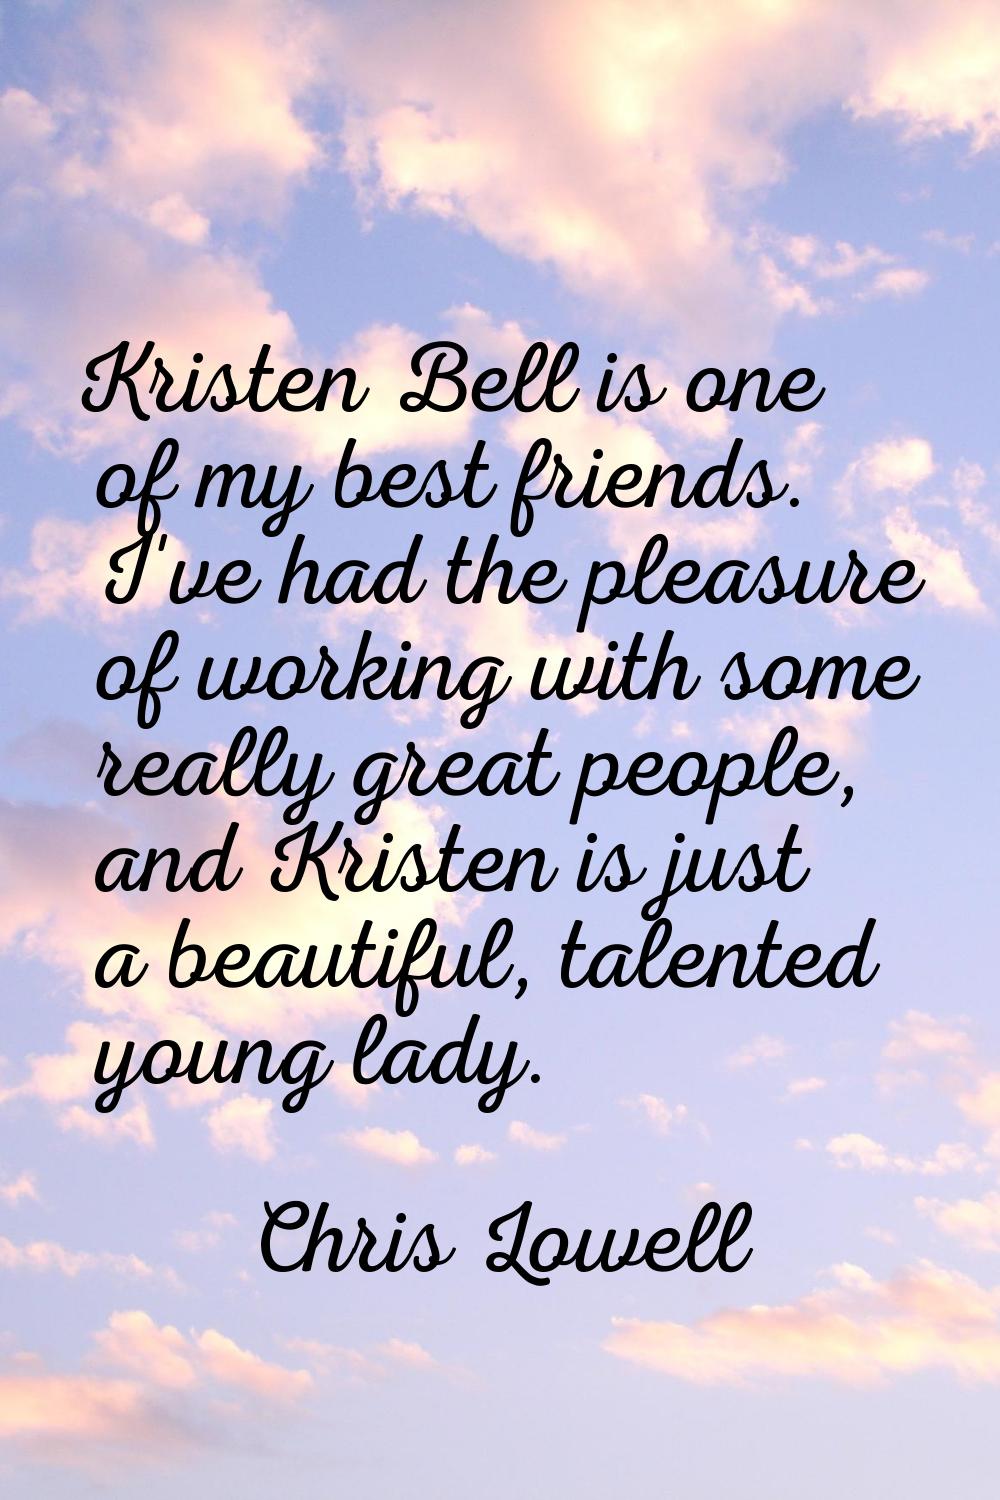 Kristen Bell is one of my best friends. I've had the pleasure of working with some really great peo